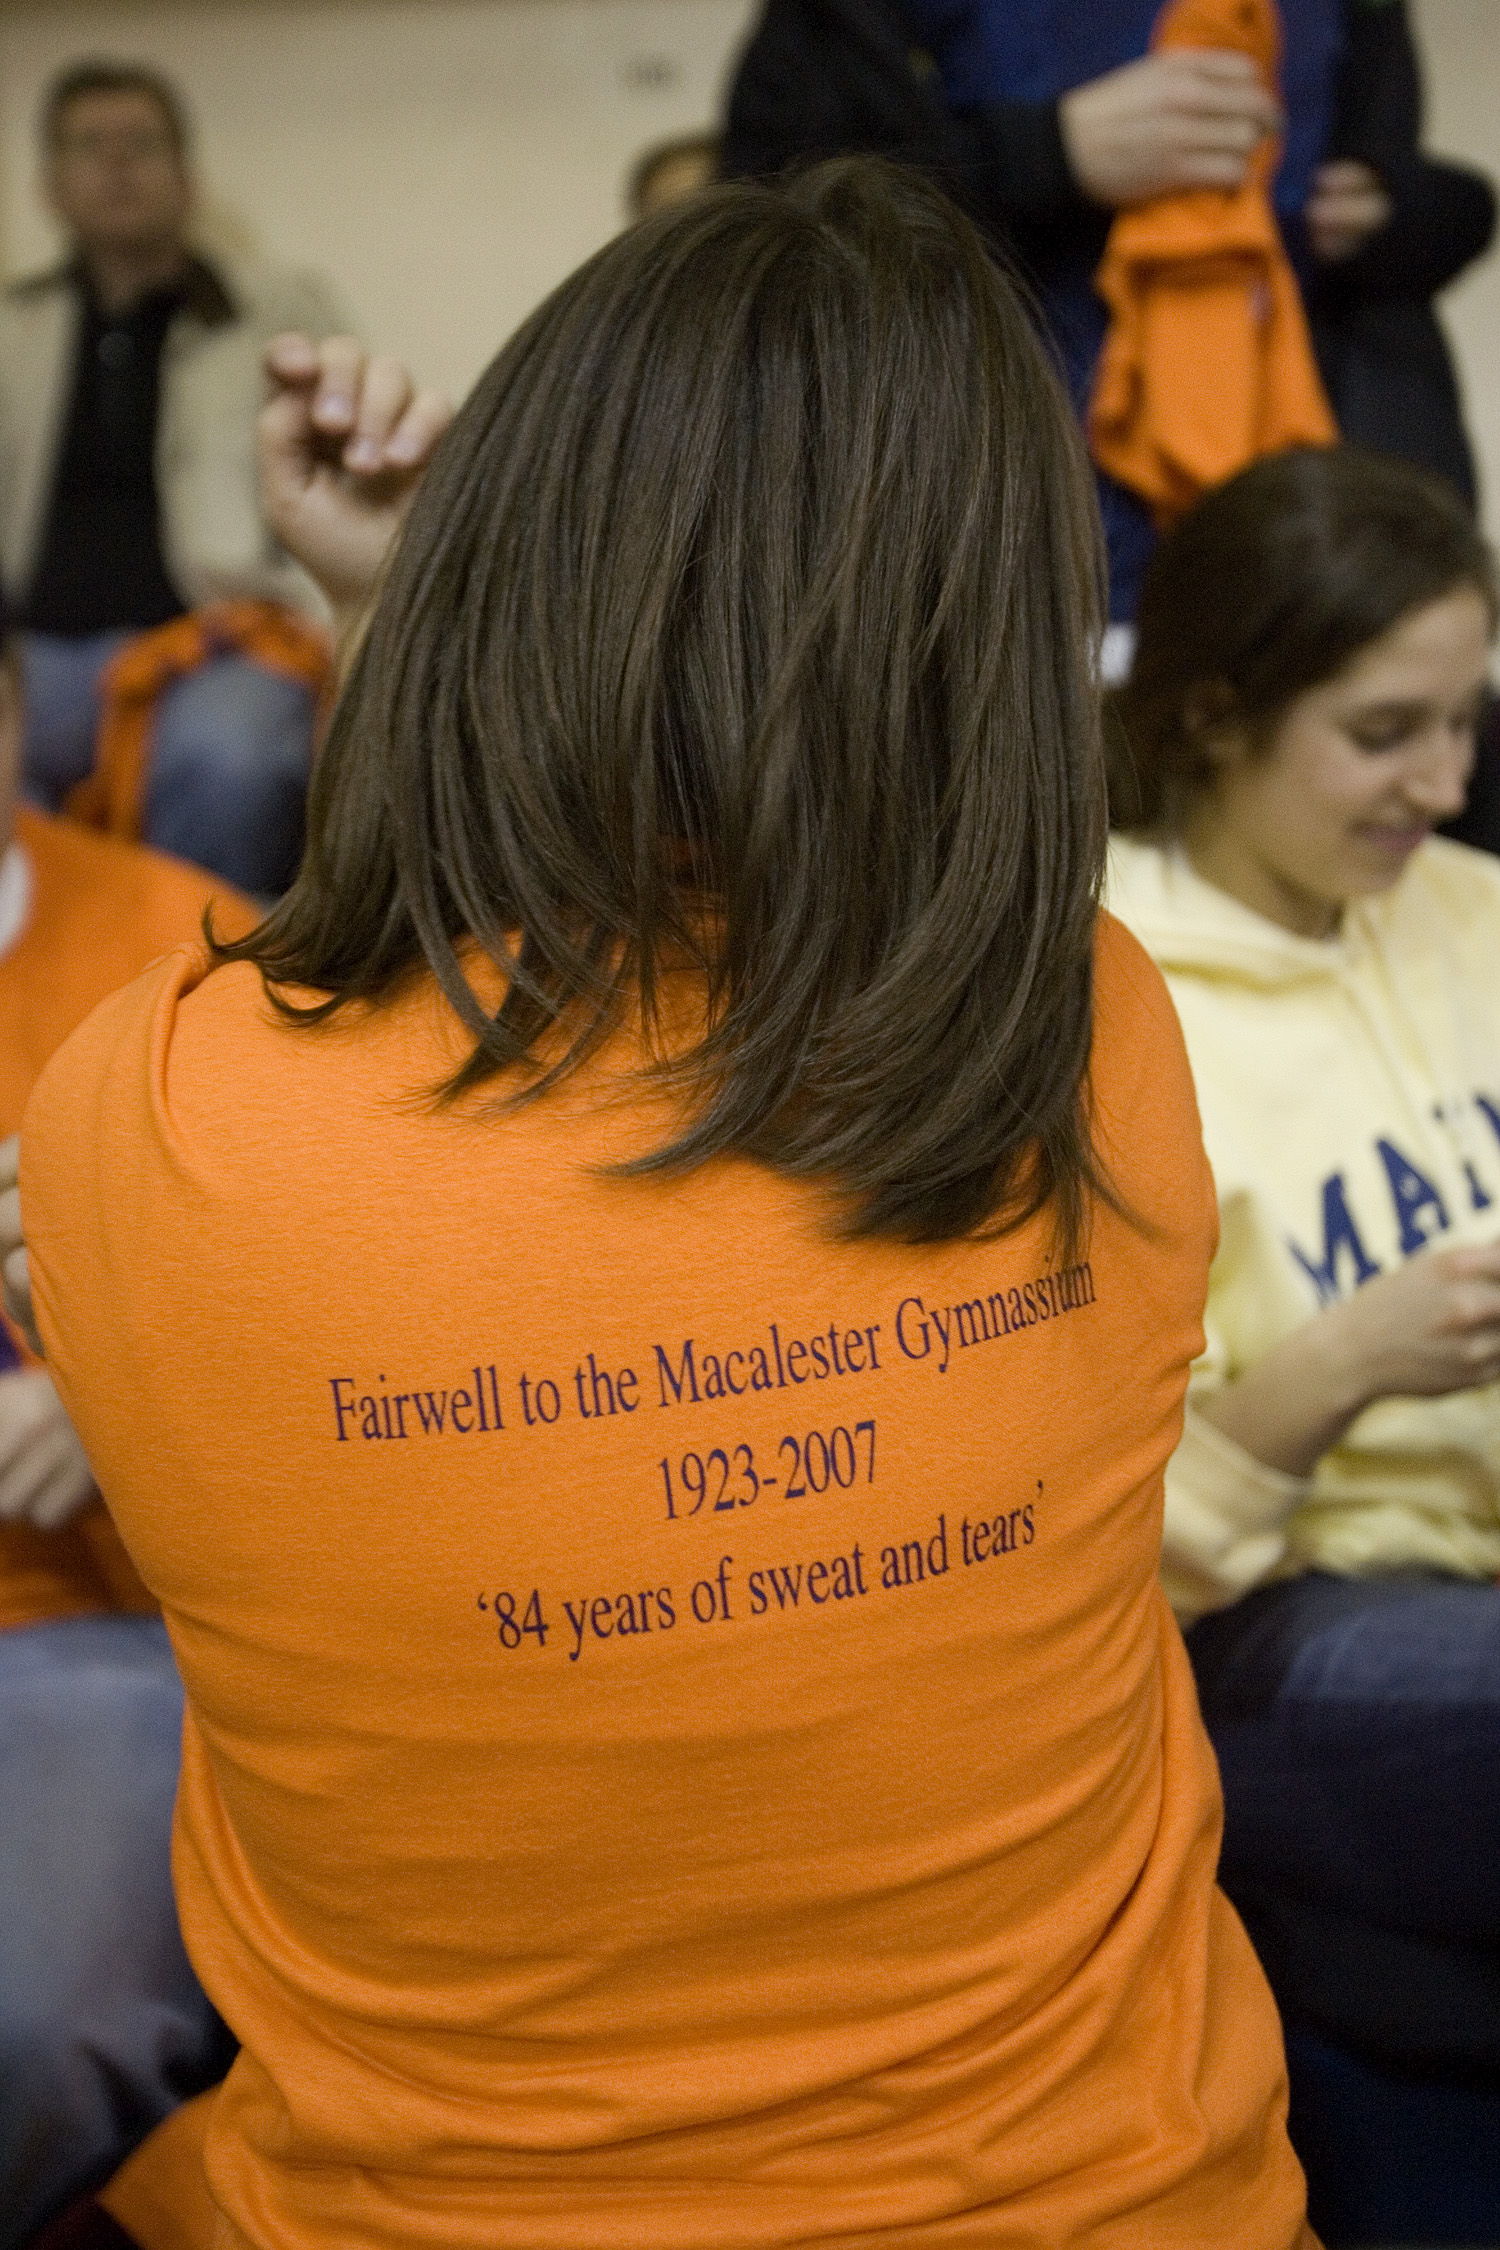 Last Basketball Game in the Old Gymnasium, 2007.